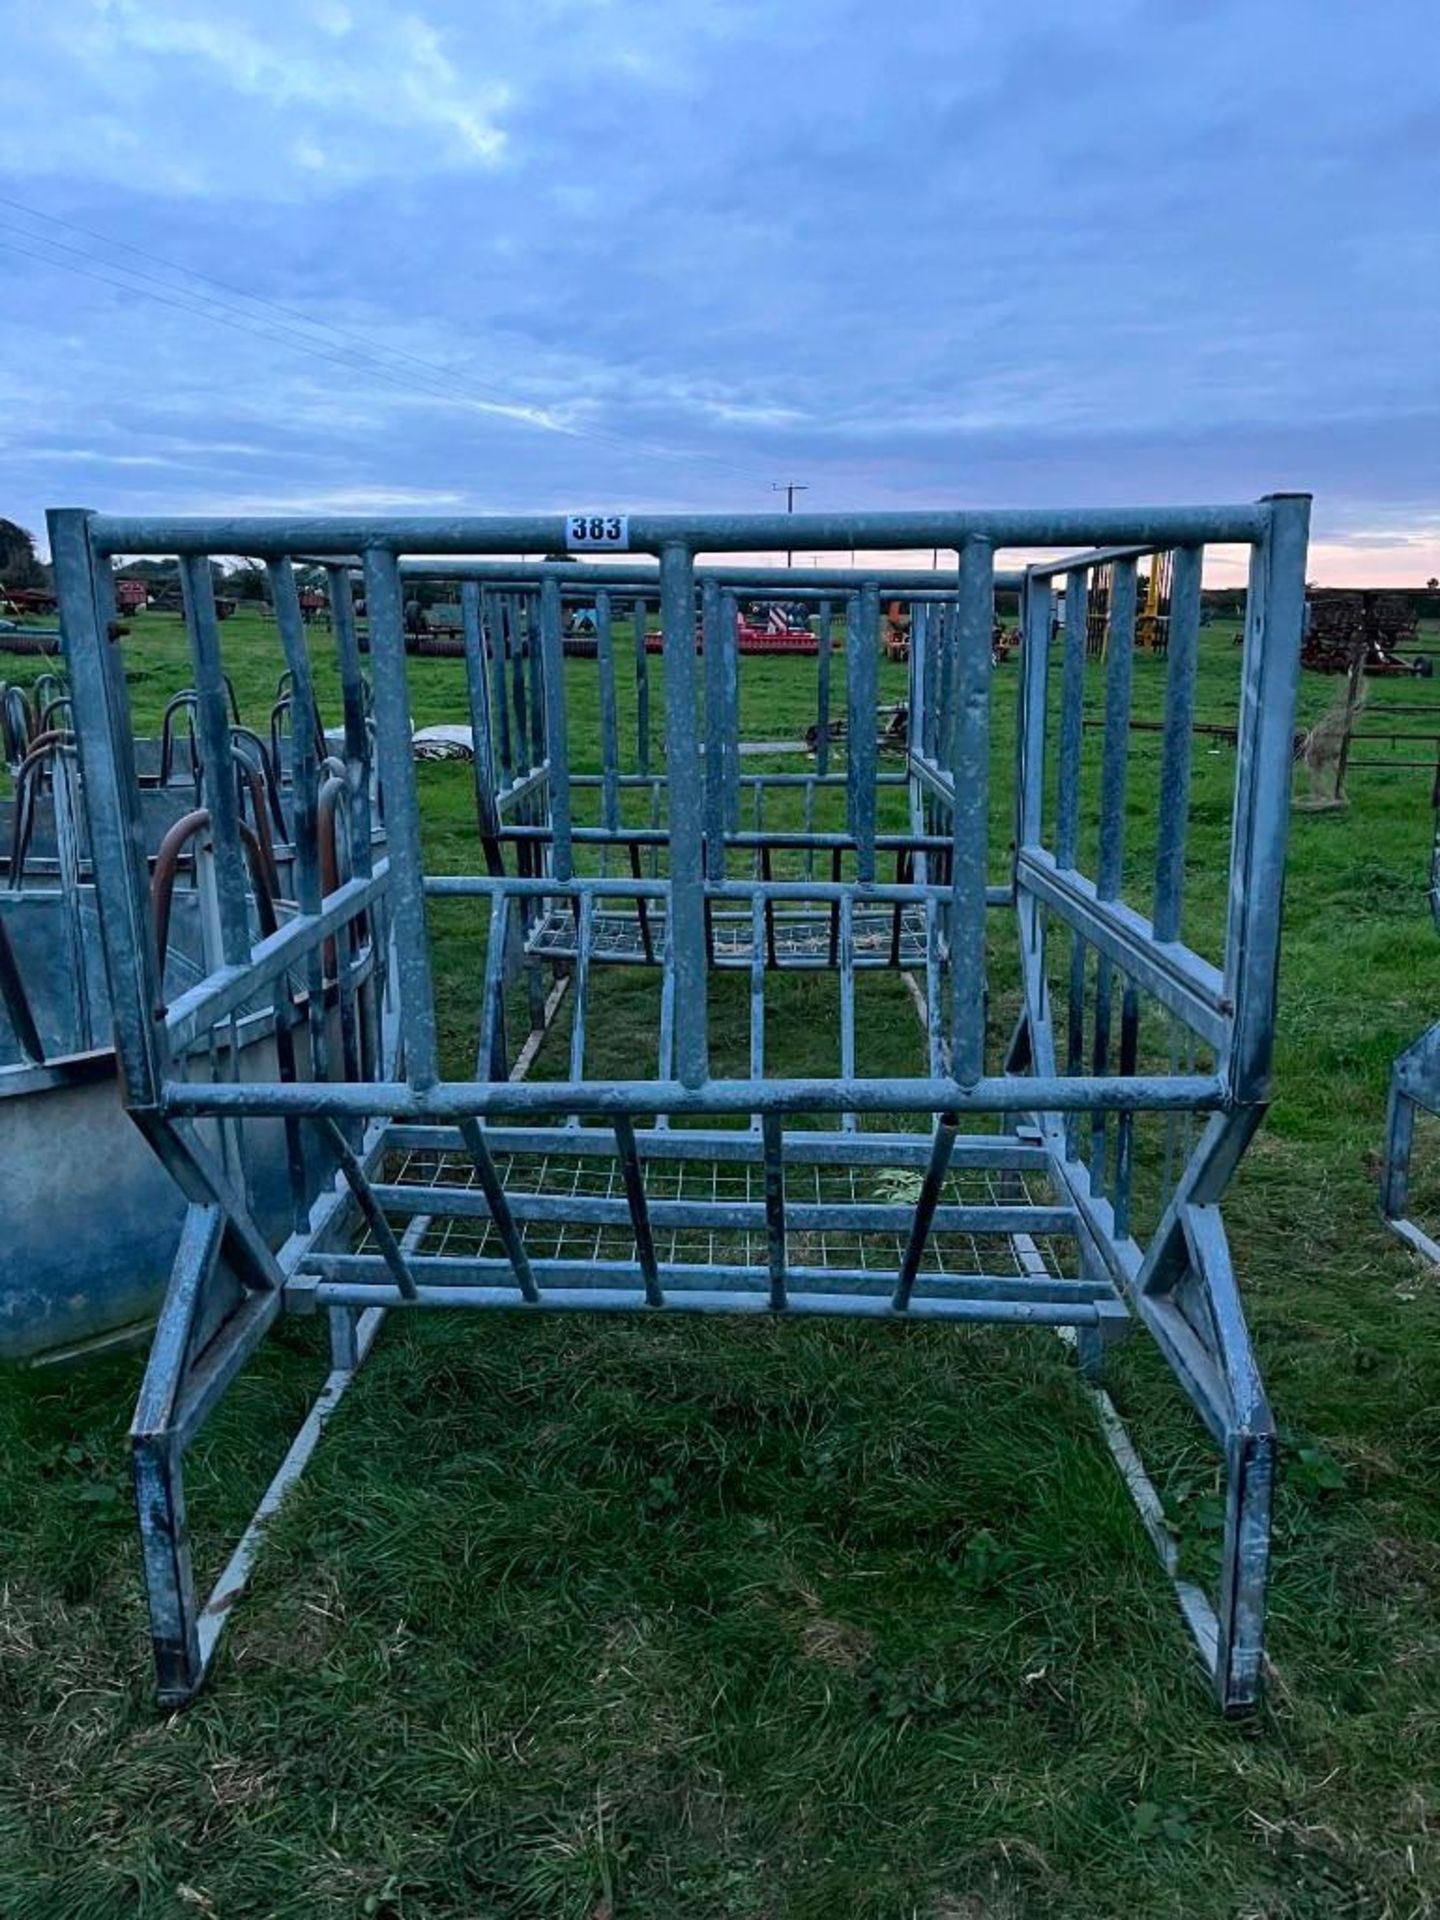 2No. Cattle & Sheep Round Bale Cradle Feeders